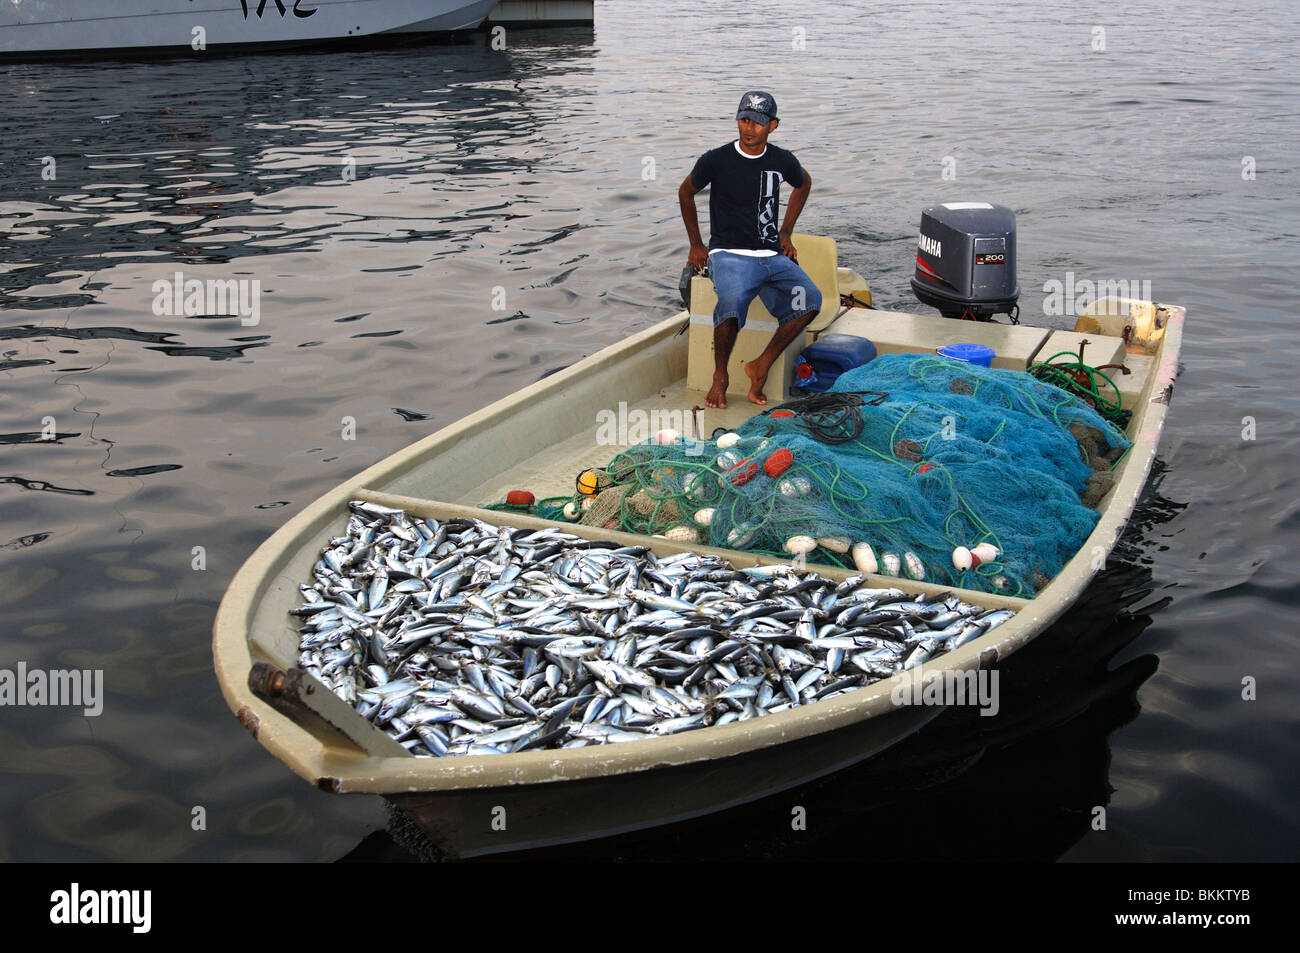 Fisherman arriving in his fishing boat with fresh catch in the